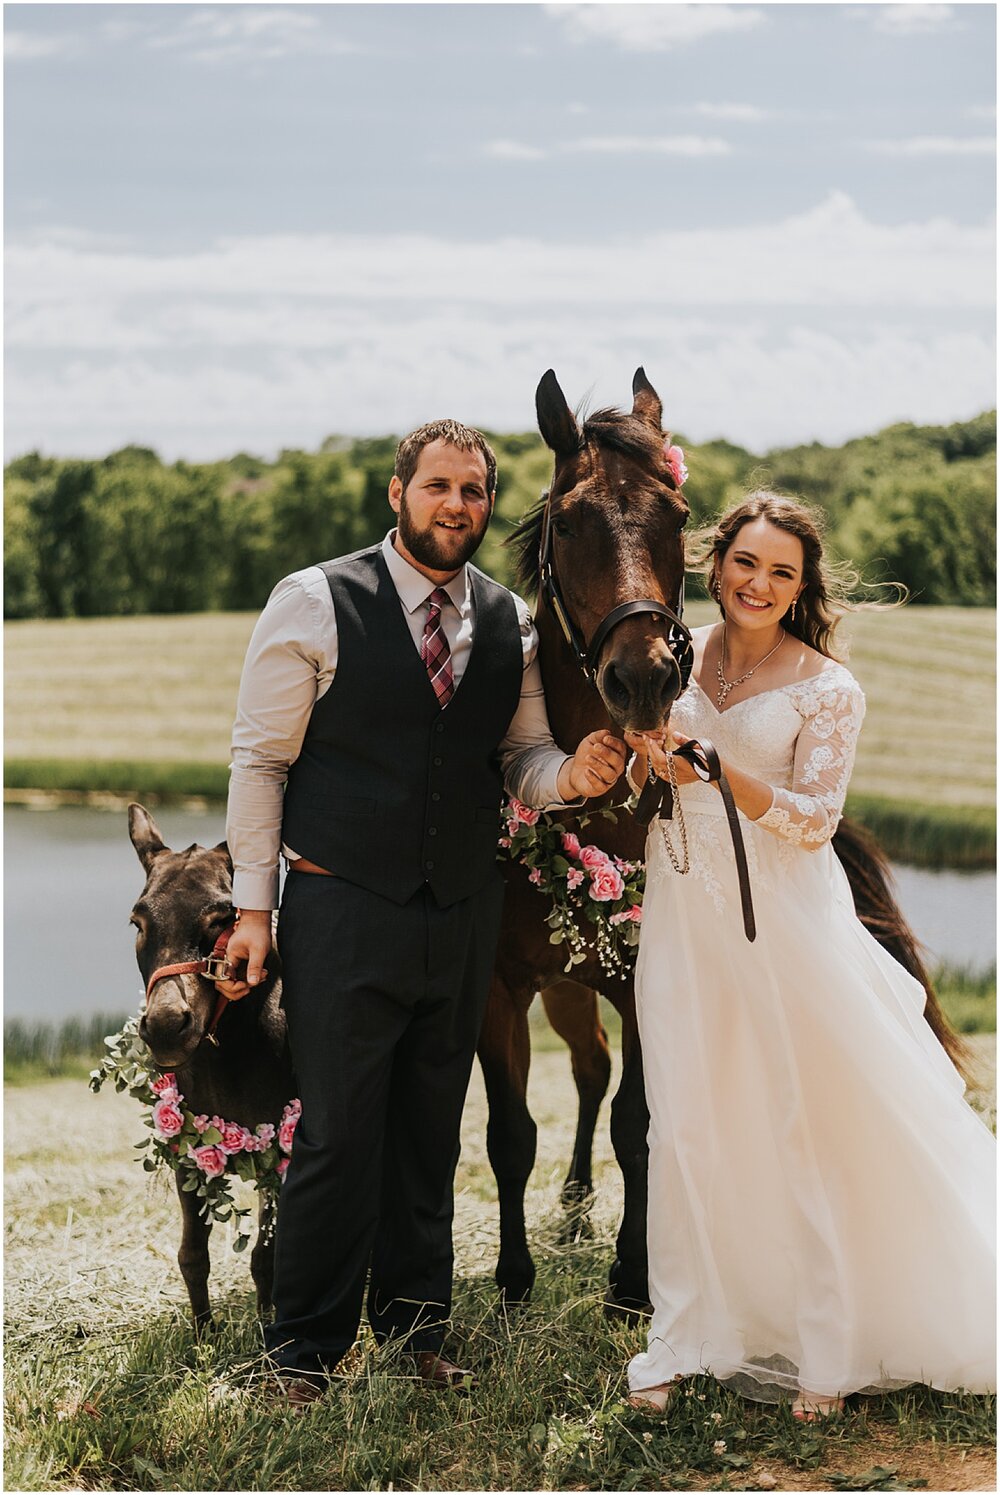  bride and groom portrait with horses before the wedding in mpls 